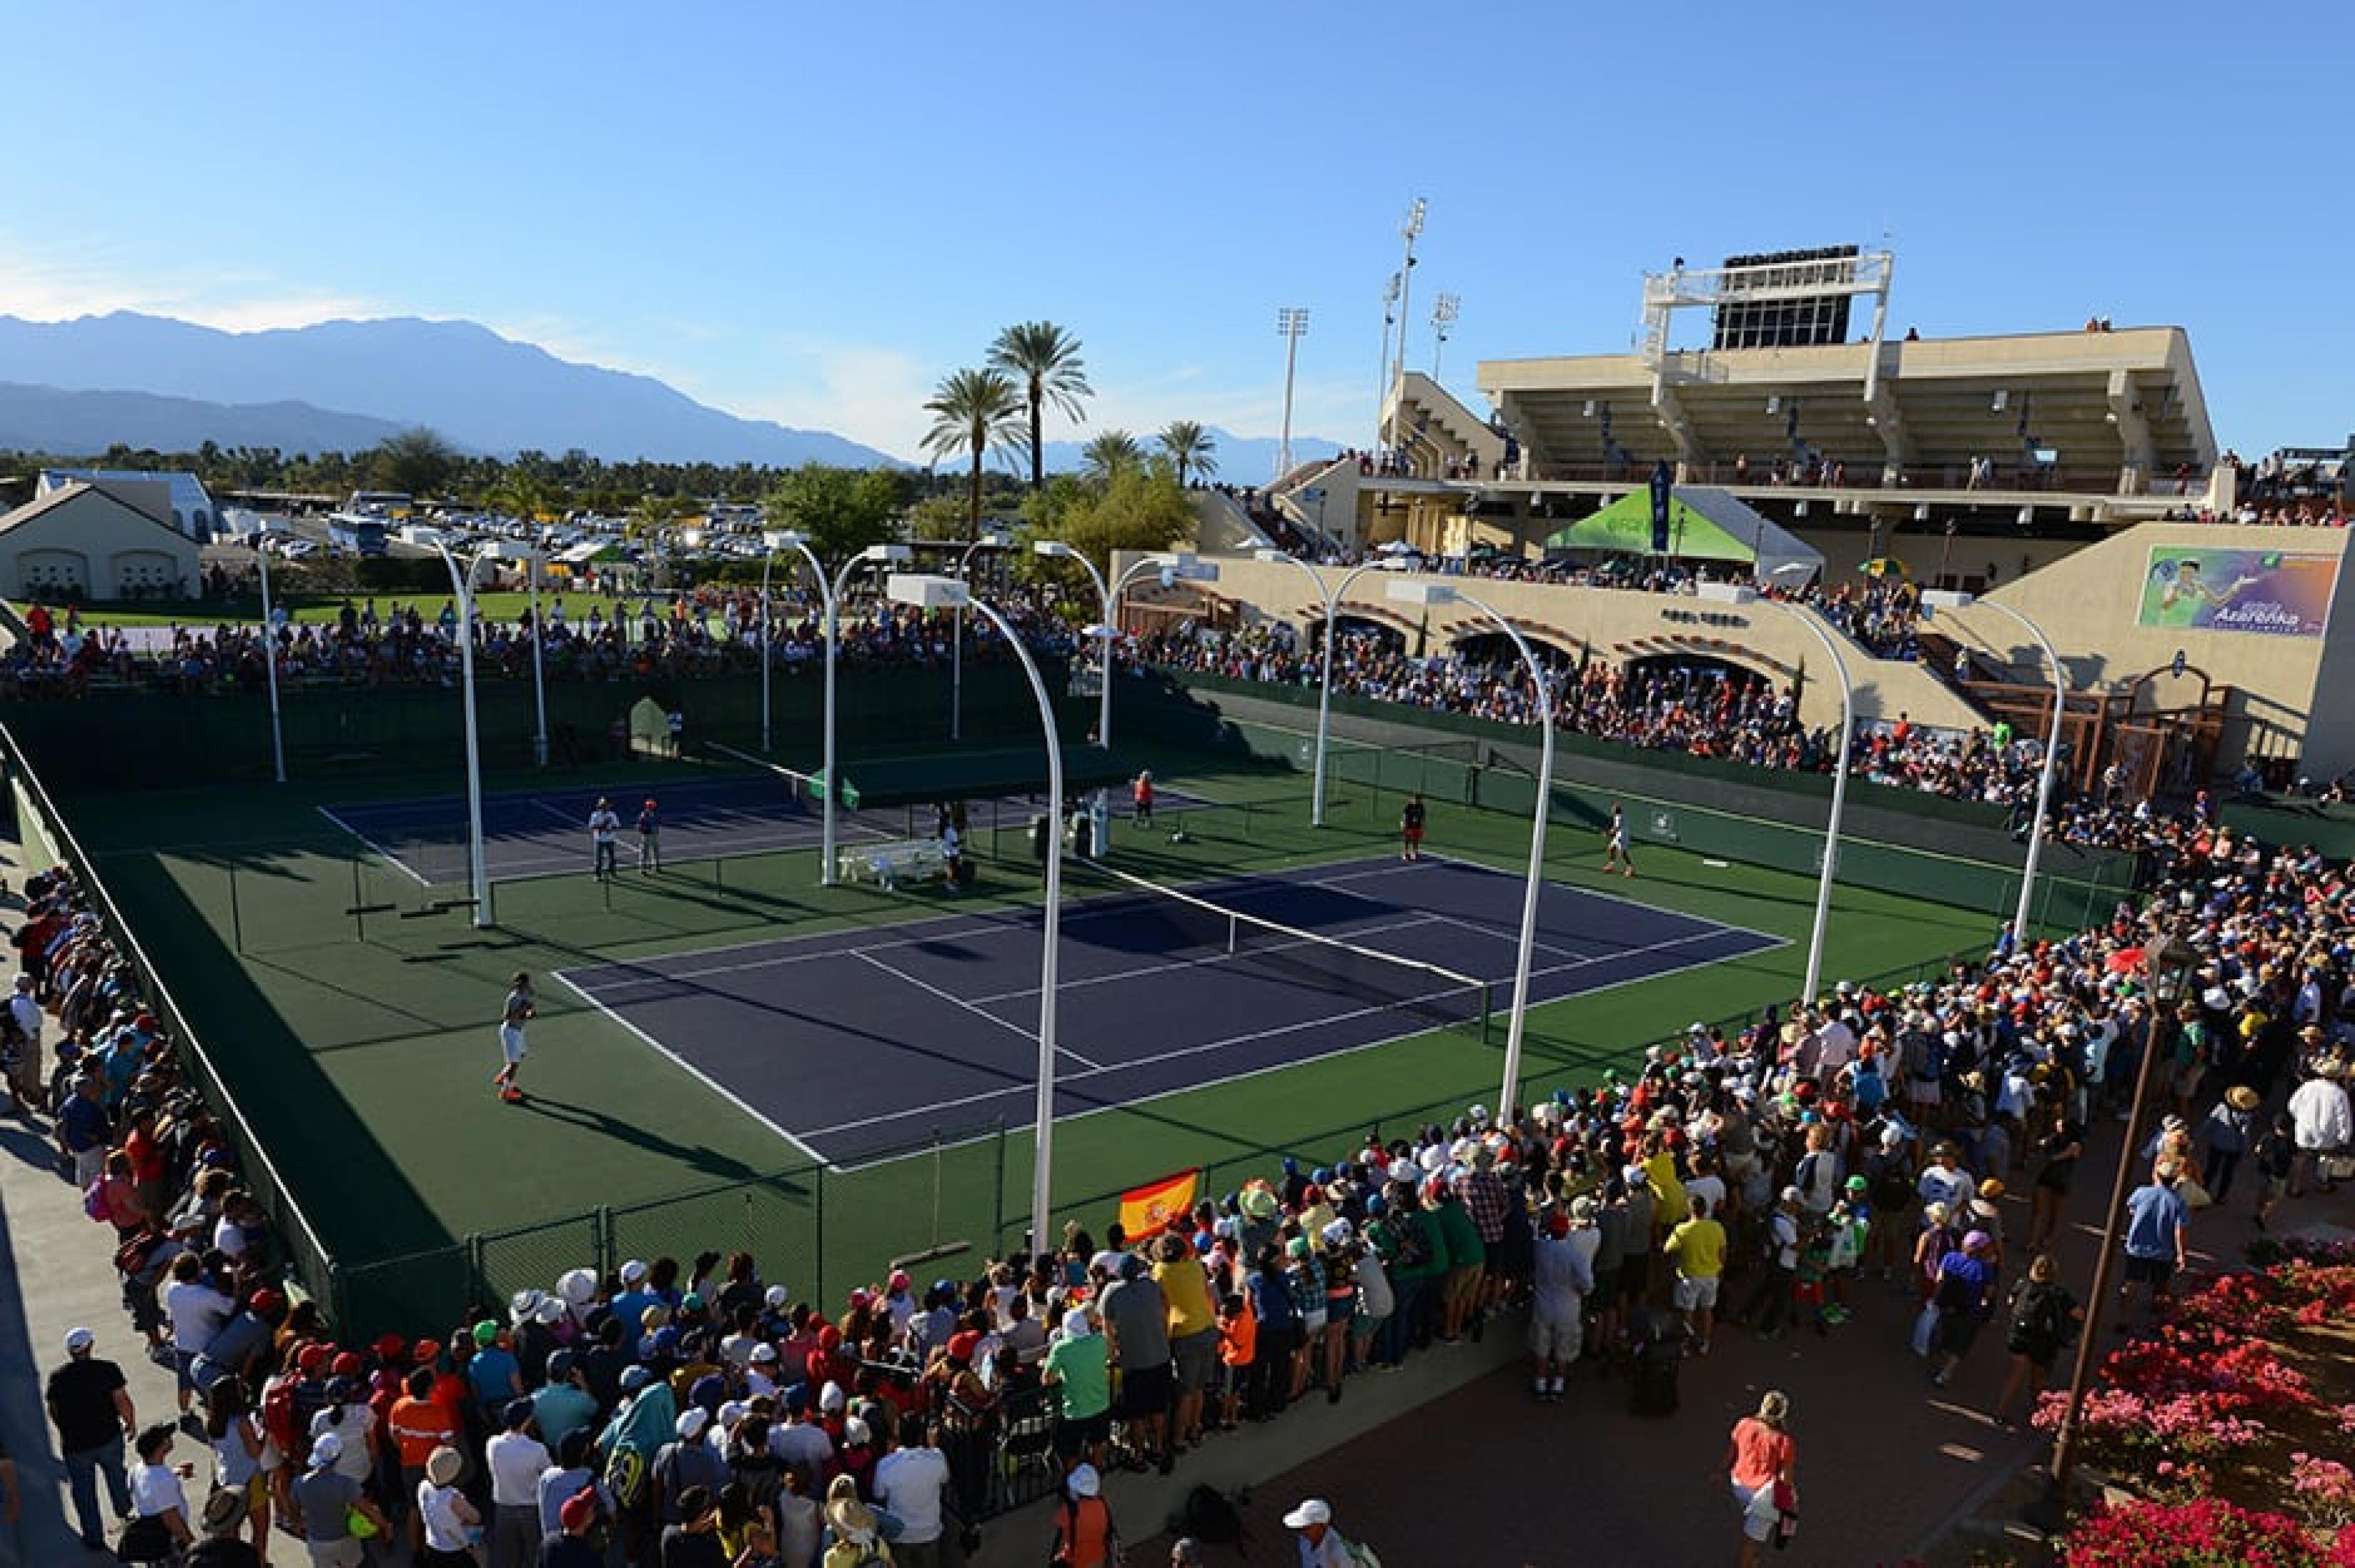 Aerial View - Indian Wells Tennis Garden, Palm Springs, California - Courtesy Robert Laberge/Getty Images